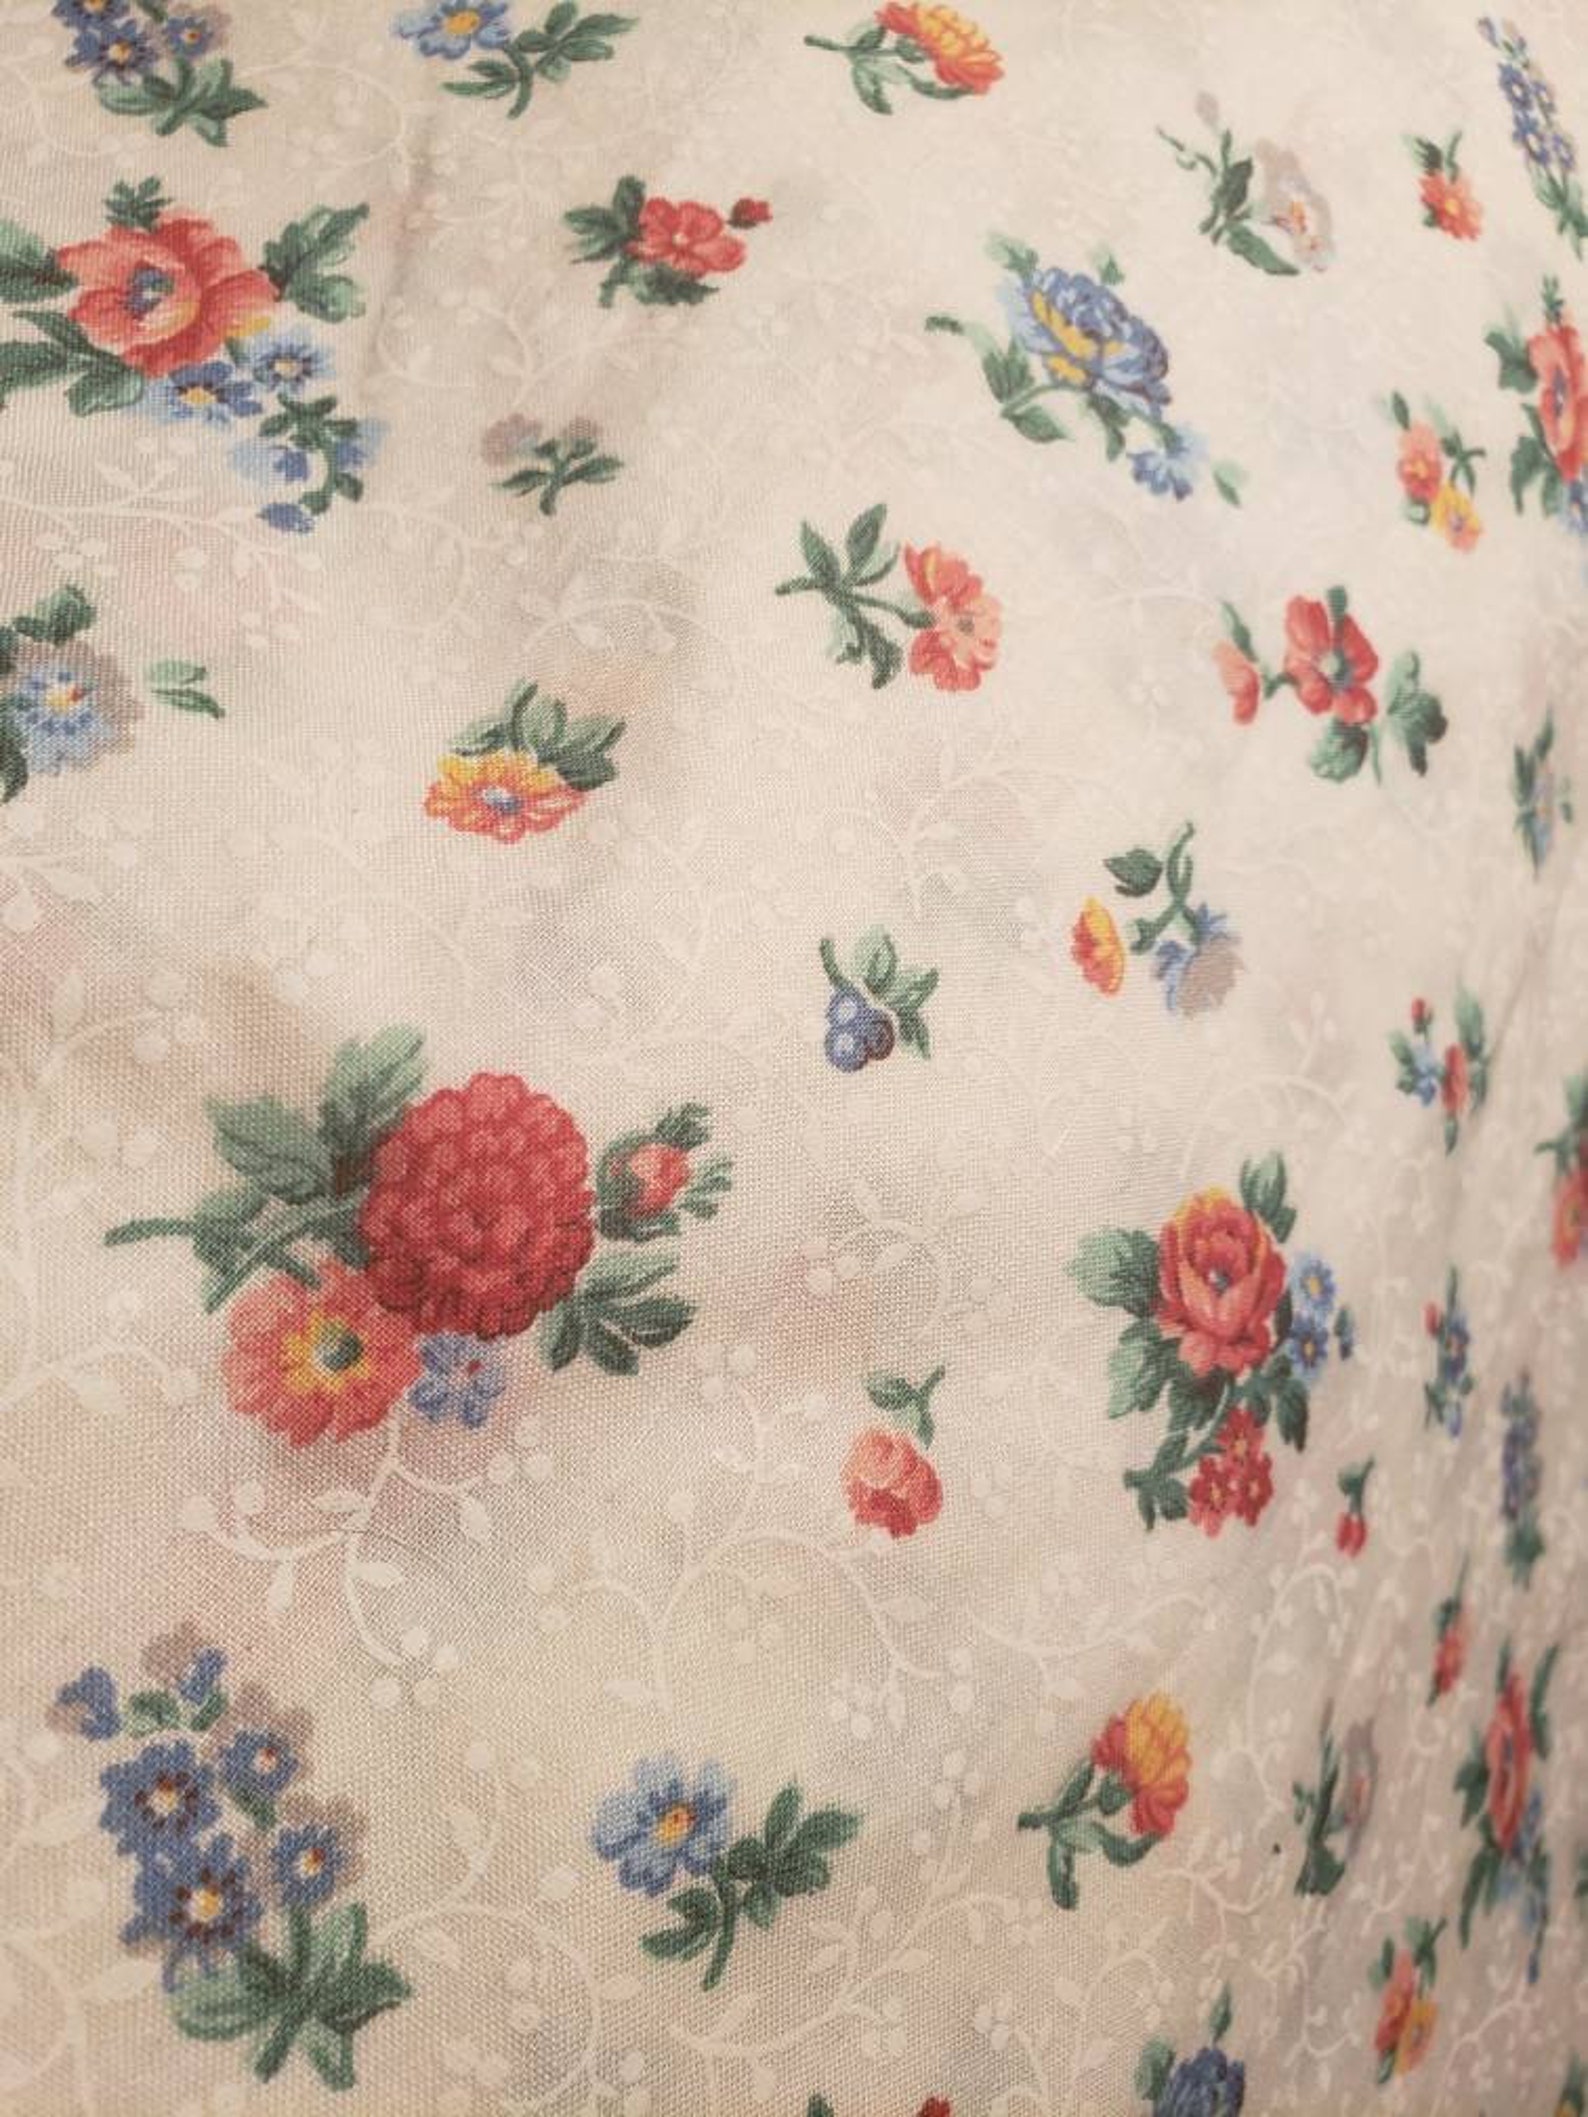 Vintage VIP Floral Cotton Fabric 6 Yards LOVELY | Etsy